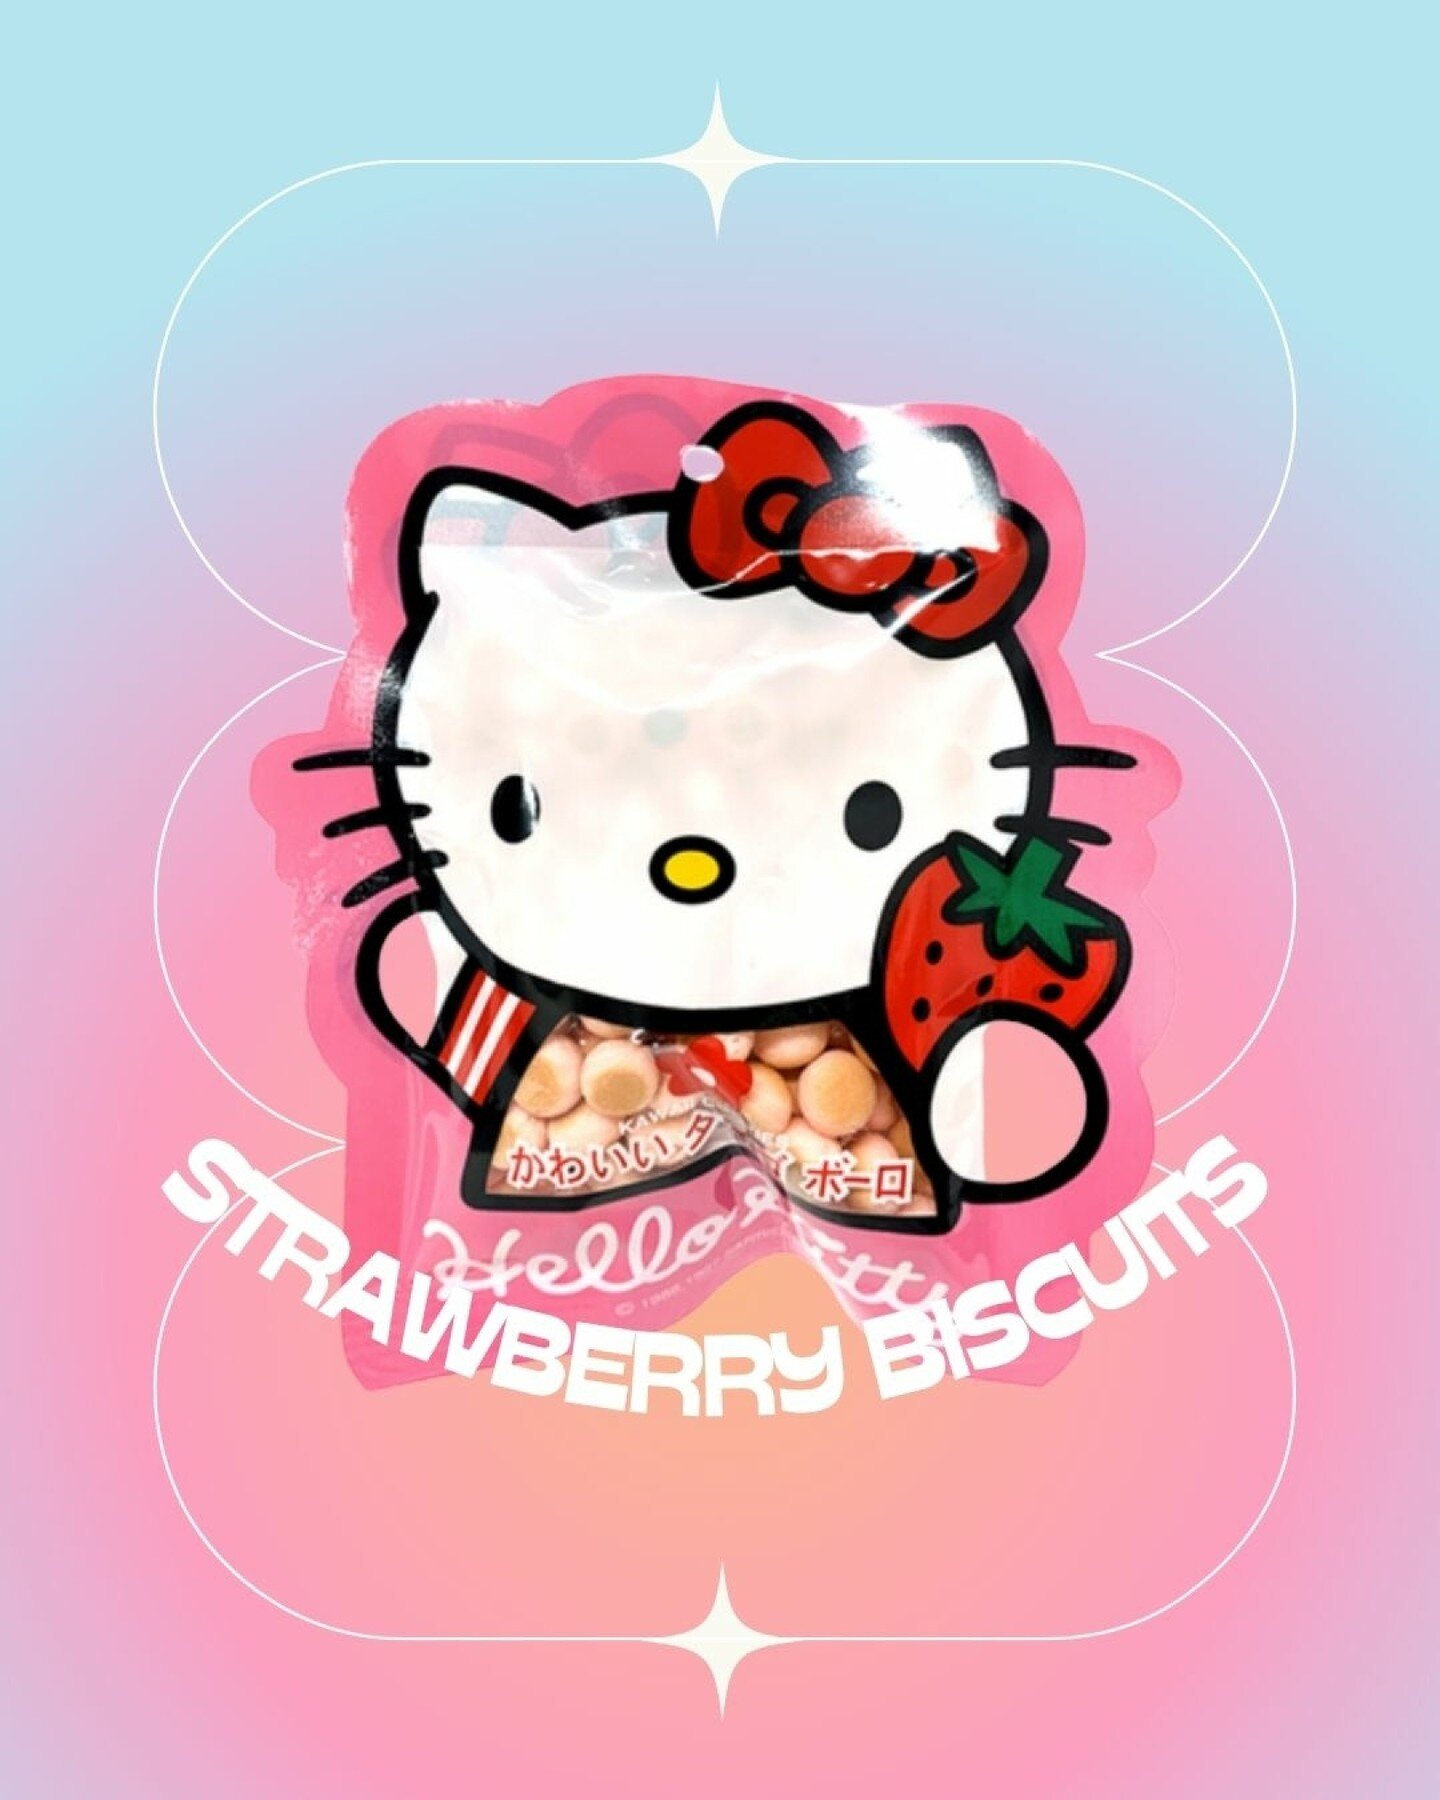 Strawberry  biscuits the size of pebbles, brought to you by way of one iconic Kitty 😻